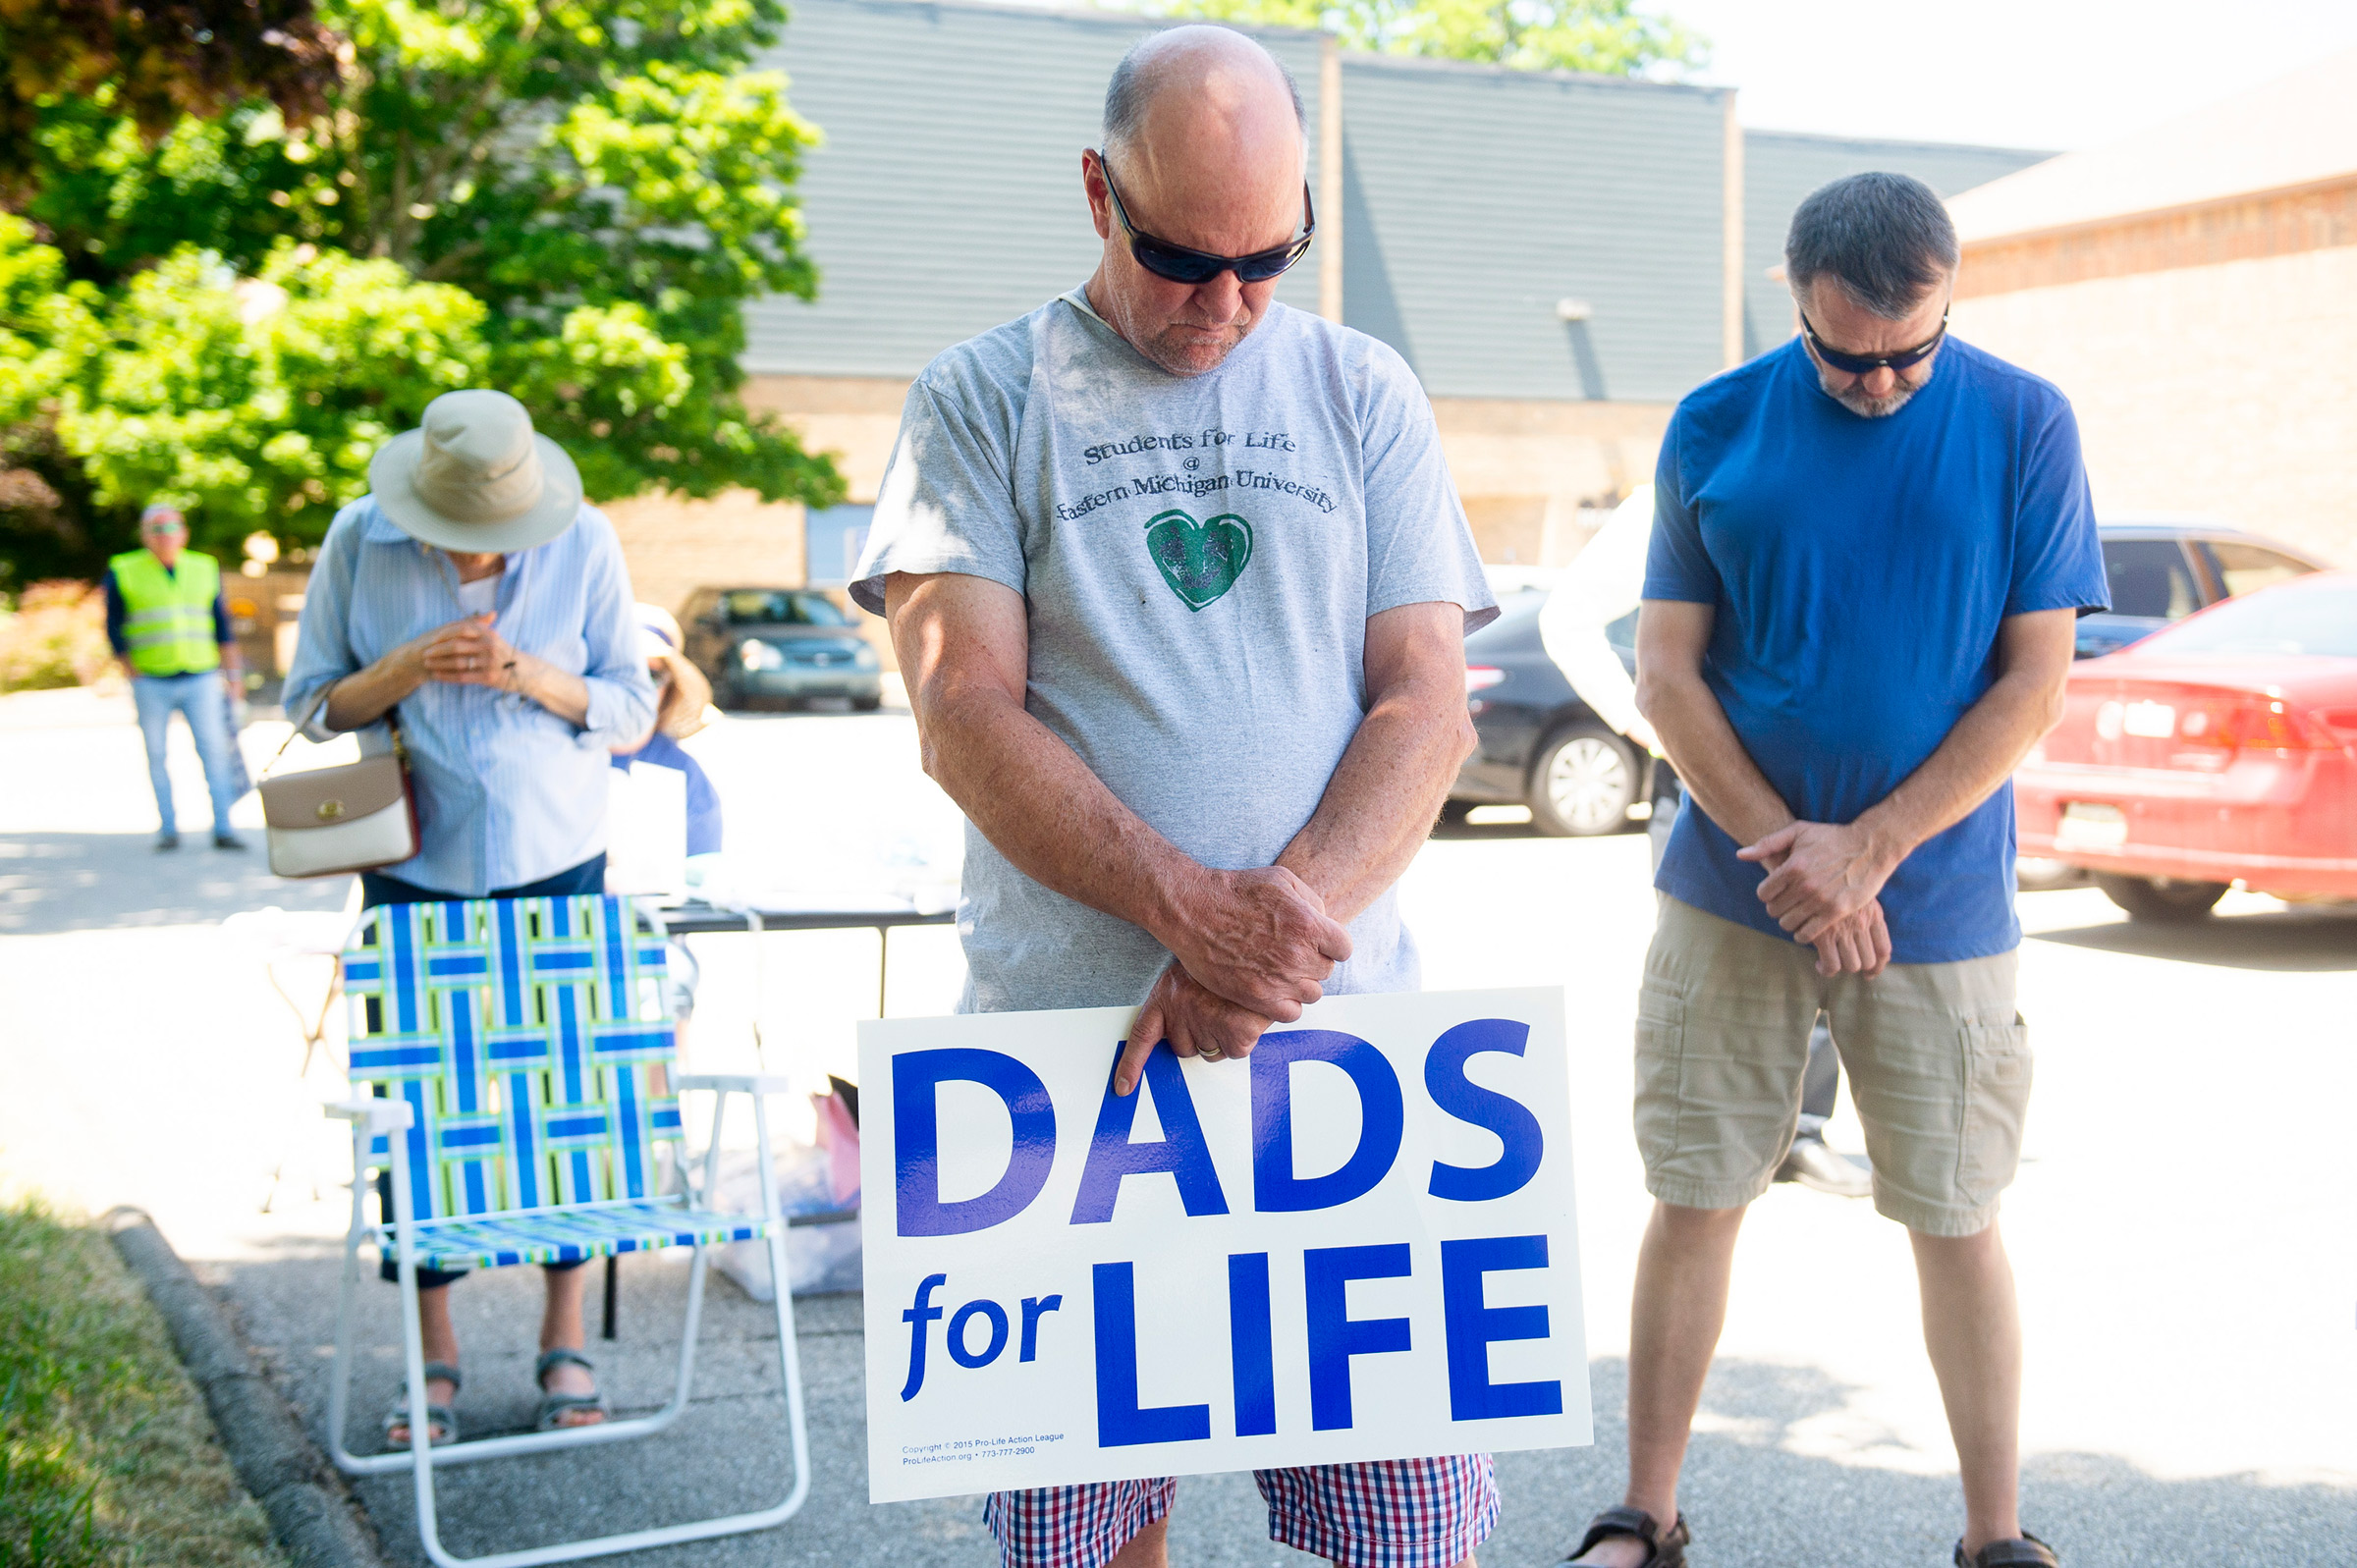 Rick Rainville bows his head in prayer at a rally of abortion opponents organized by Sidewalk Advocates for Life outside the Power Family Health Center Planned Parenthood in Ann Arbor, Mich., on June 24, 2022. (Jacob Hamilton—The Ann Arbor News/AP)